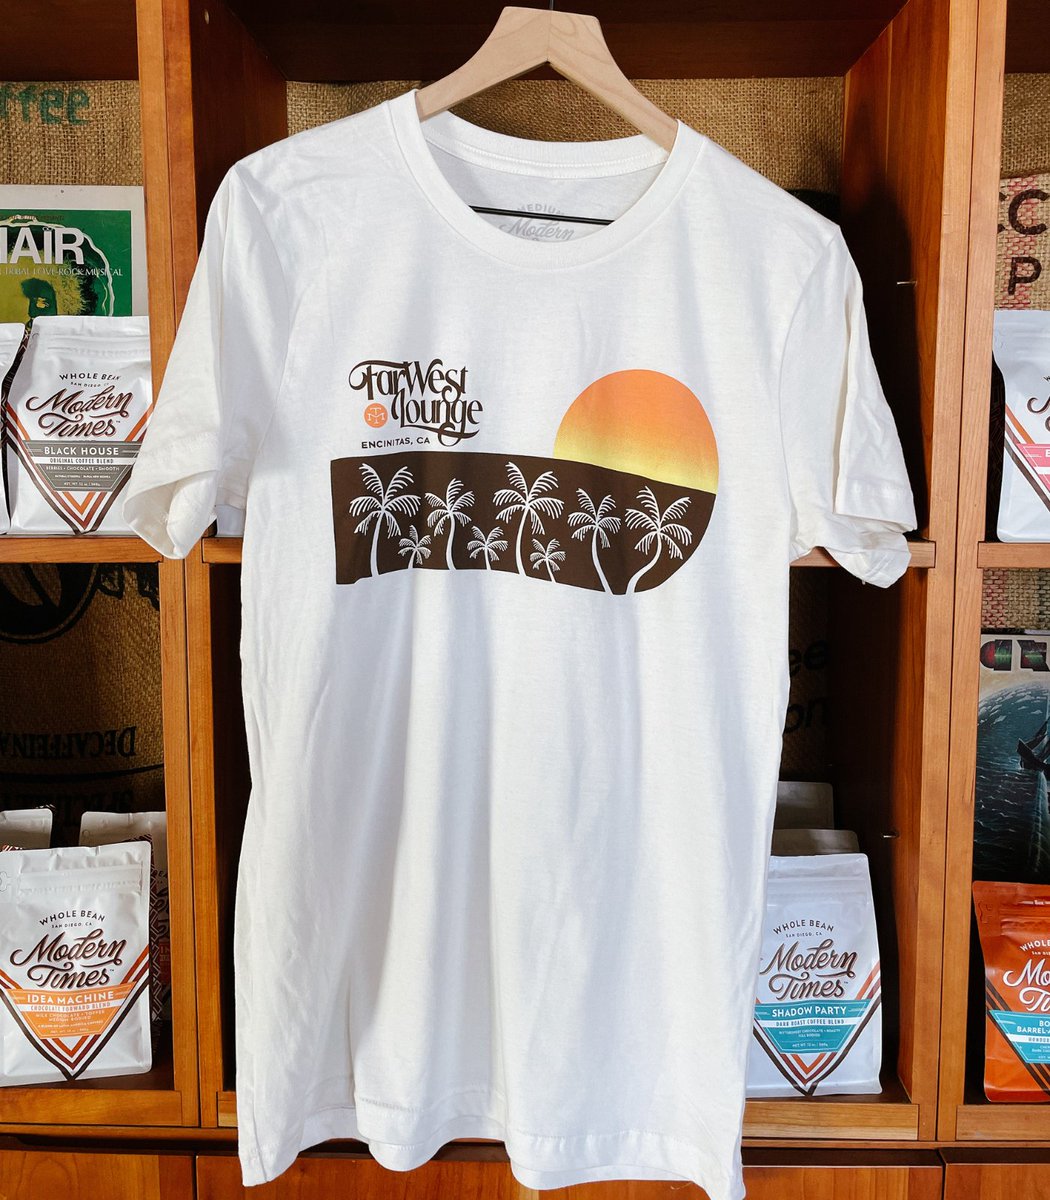 We have two more sick shirts that just hit our website. Science says if you wear them while drinking MT beer or coffee, they will taste 100% better. Shop online now at bit.ly/3UFo5NH #newmerch #moderntimesbeer #sandiegobrewery